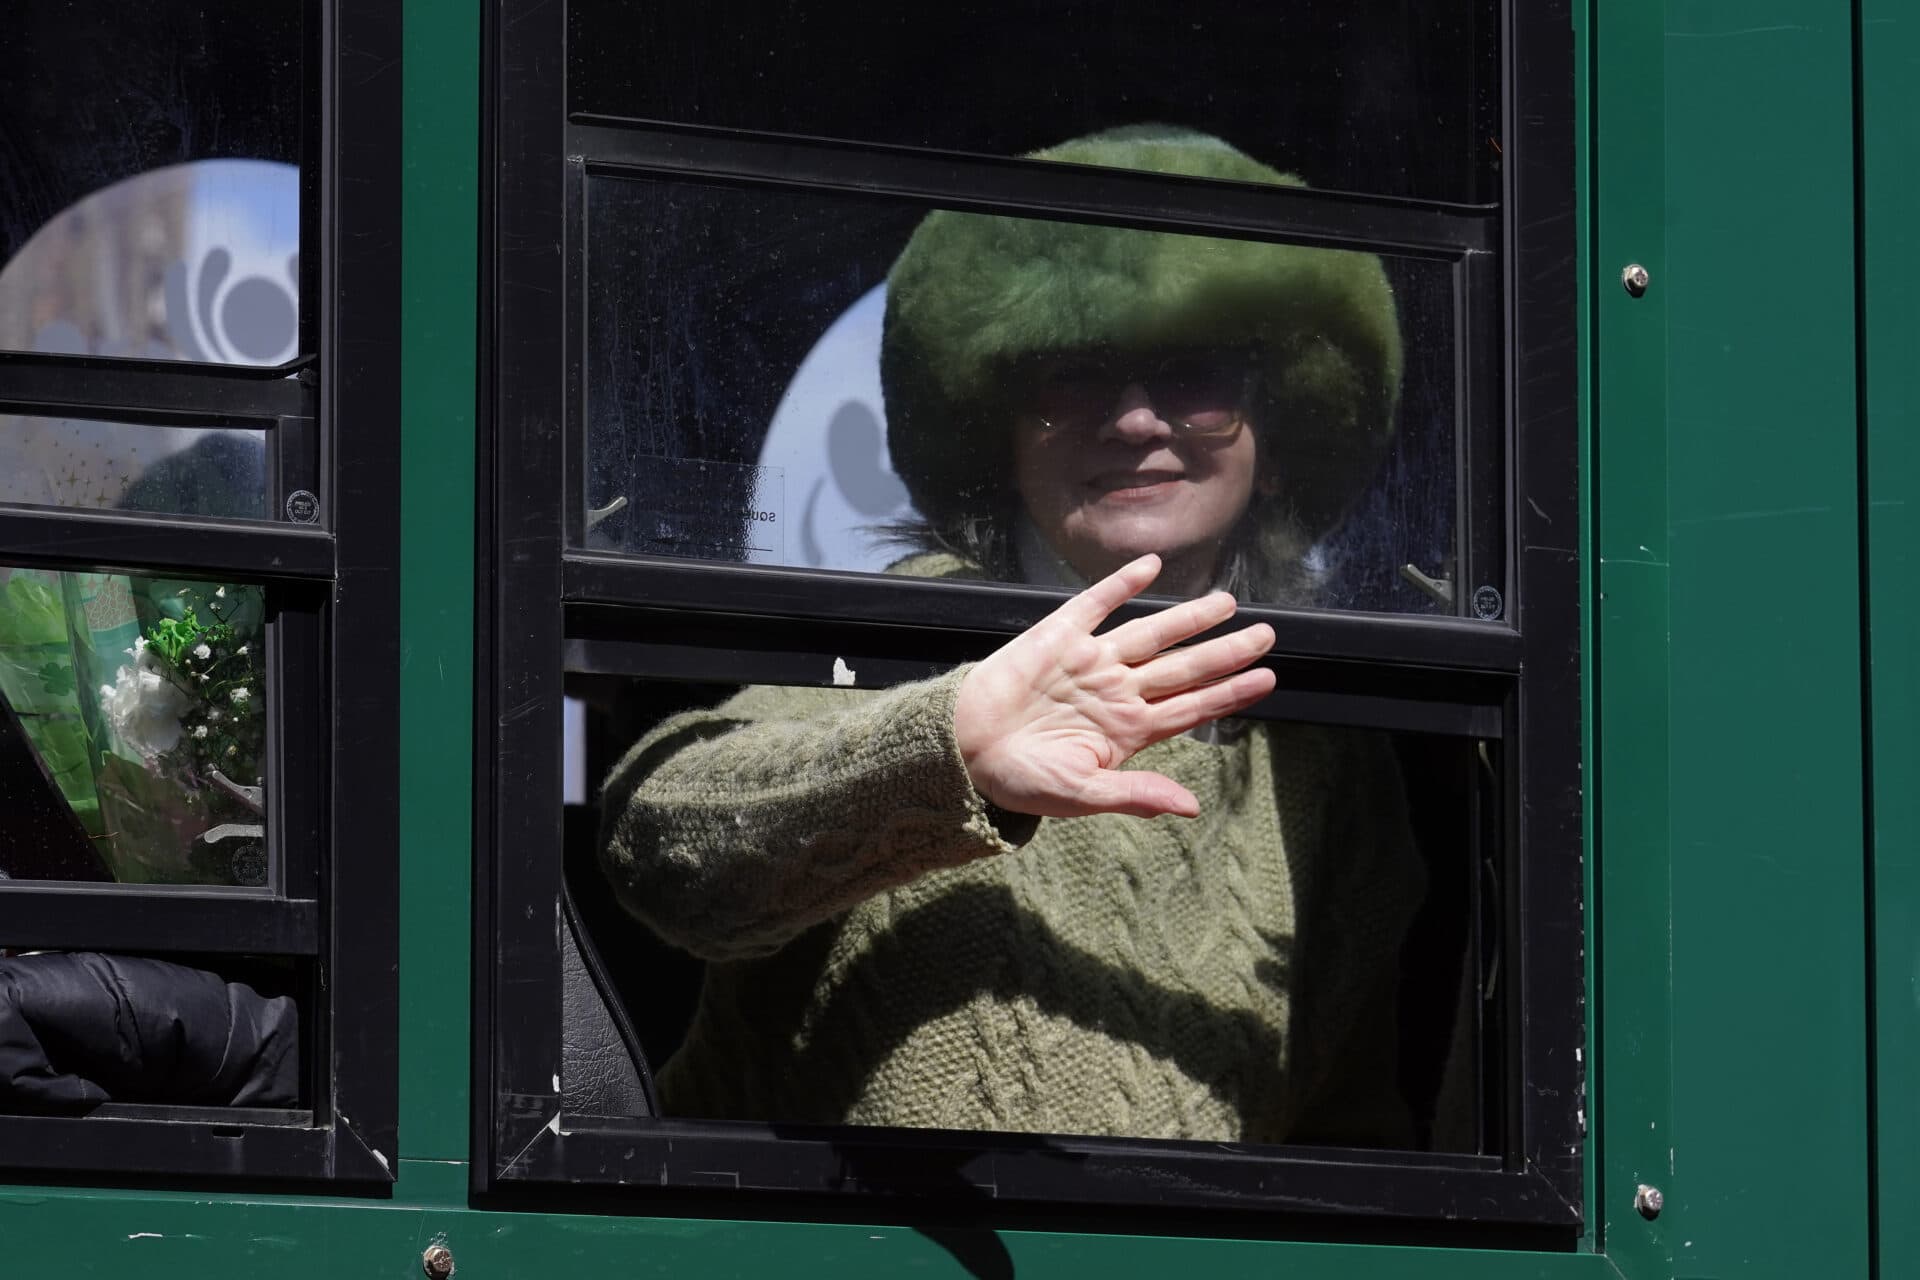 A woman dressed in green waves from a trolly during the annual St. Patrick's Day parade. (Steven Senne/AP)